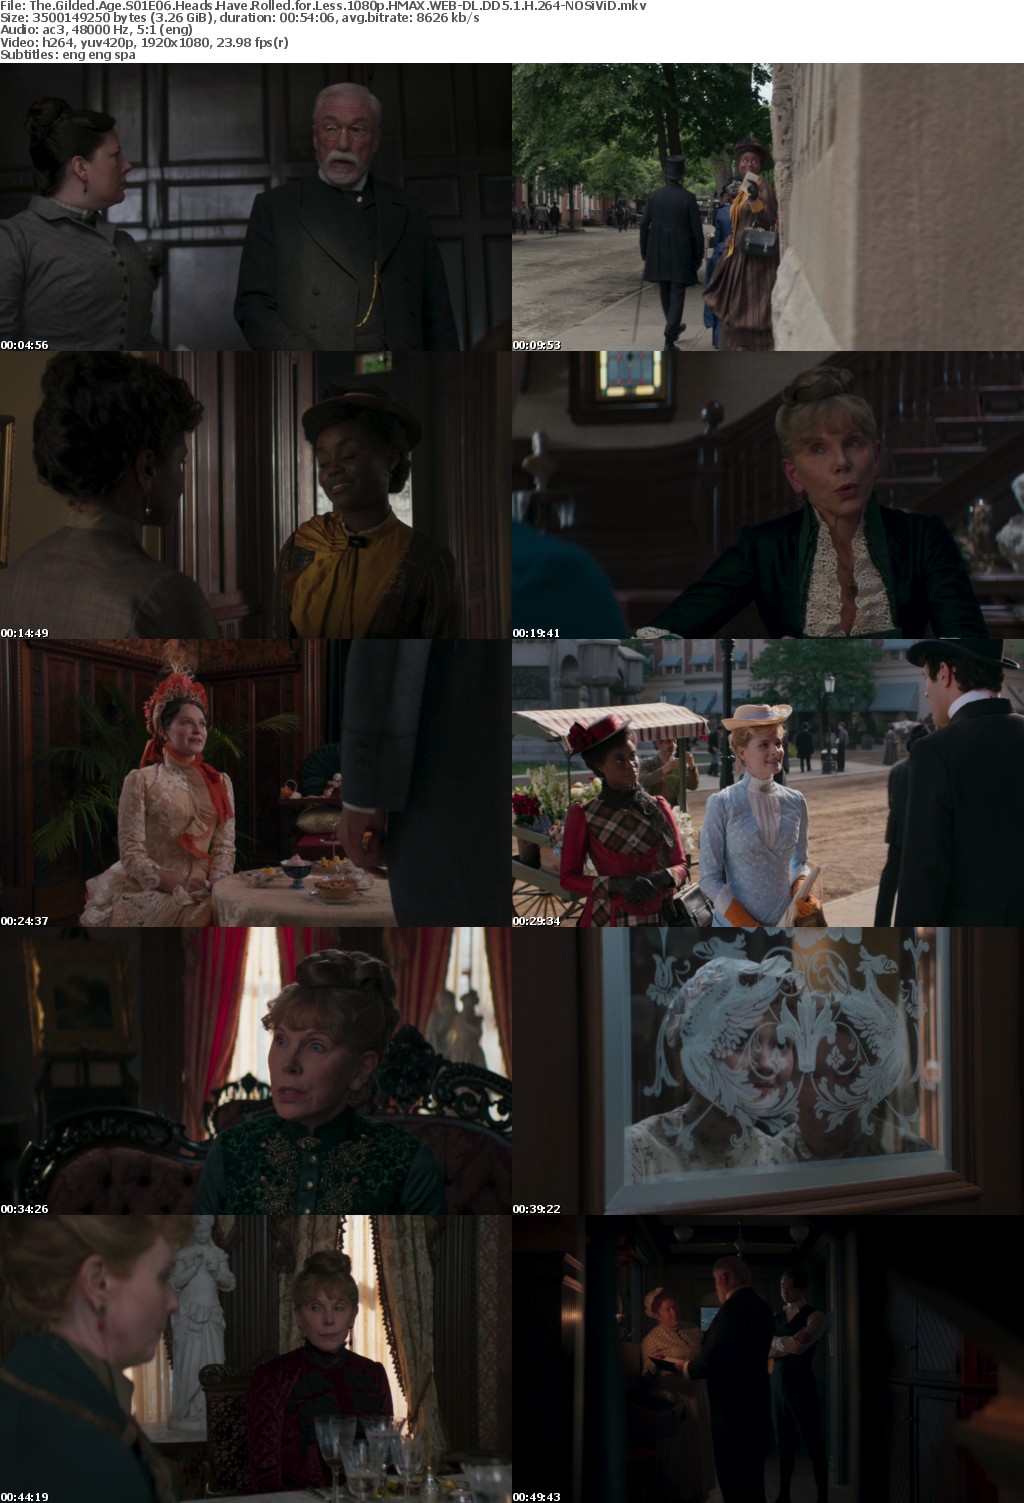 The Gilded Age S01E06 Heads Have Rolled for Less 1080p HMAX WEBRip DD5 1 x264-NOSiViD